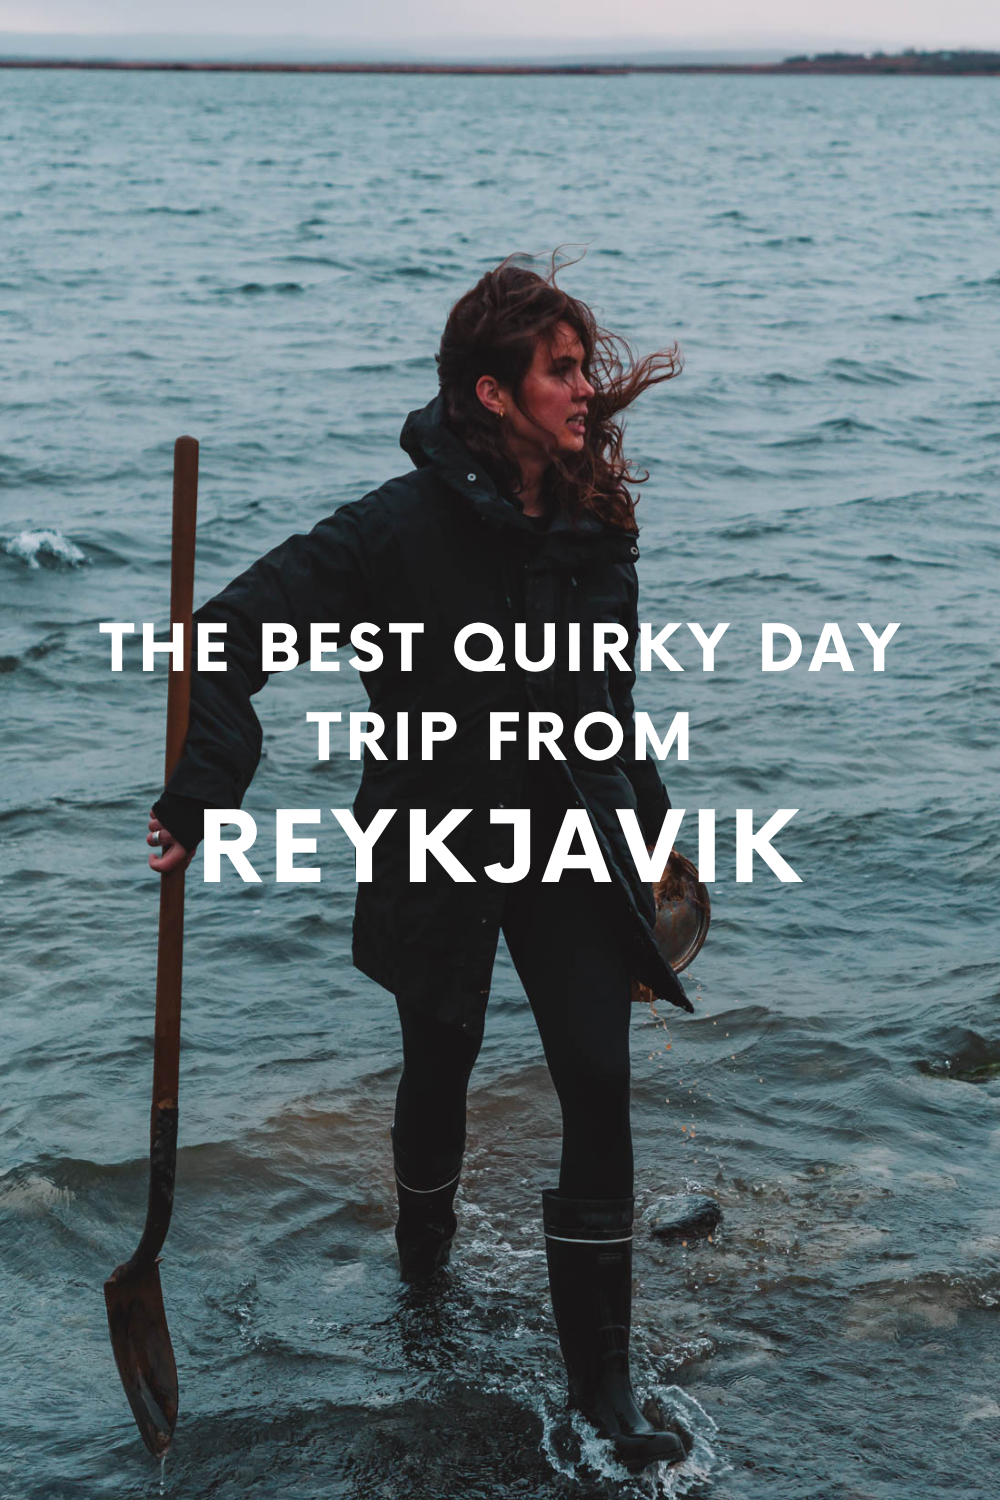 Best quirky day trip from Reykjavik